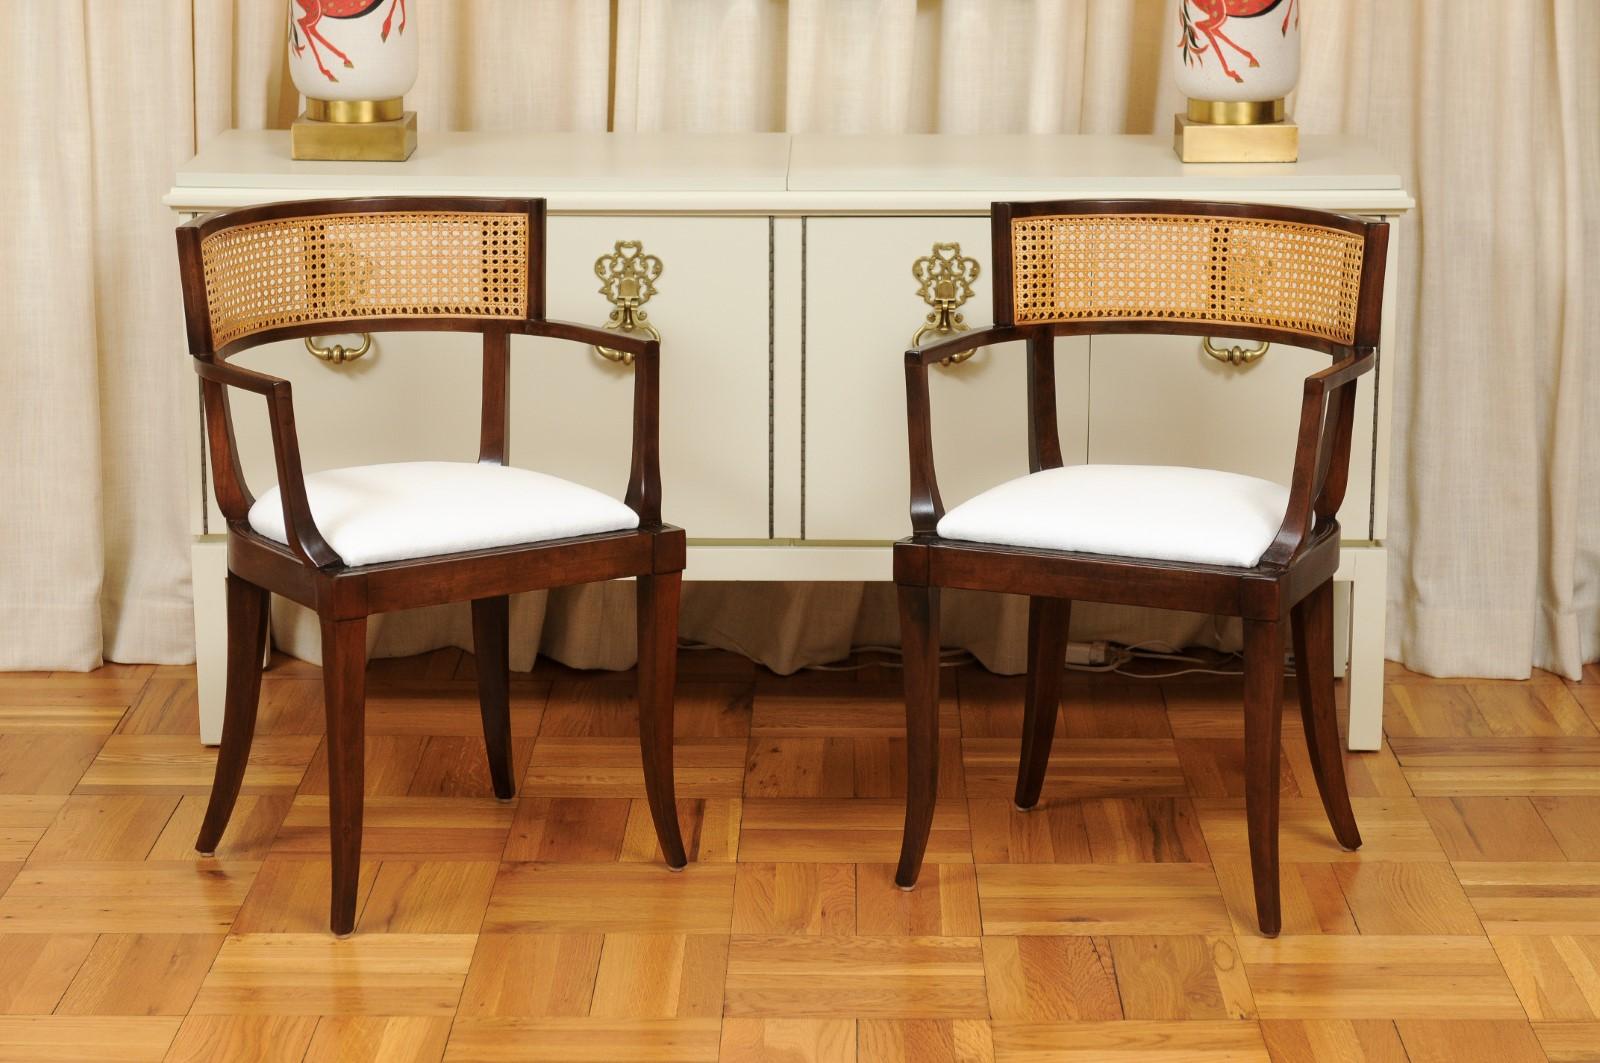 All Arms, Exquisite Set of 14 Klismos Cane Dining Chairs by Baker, circa 1958 For Sale 5